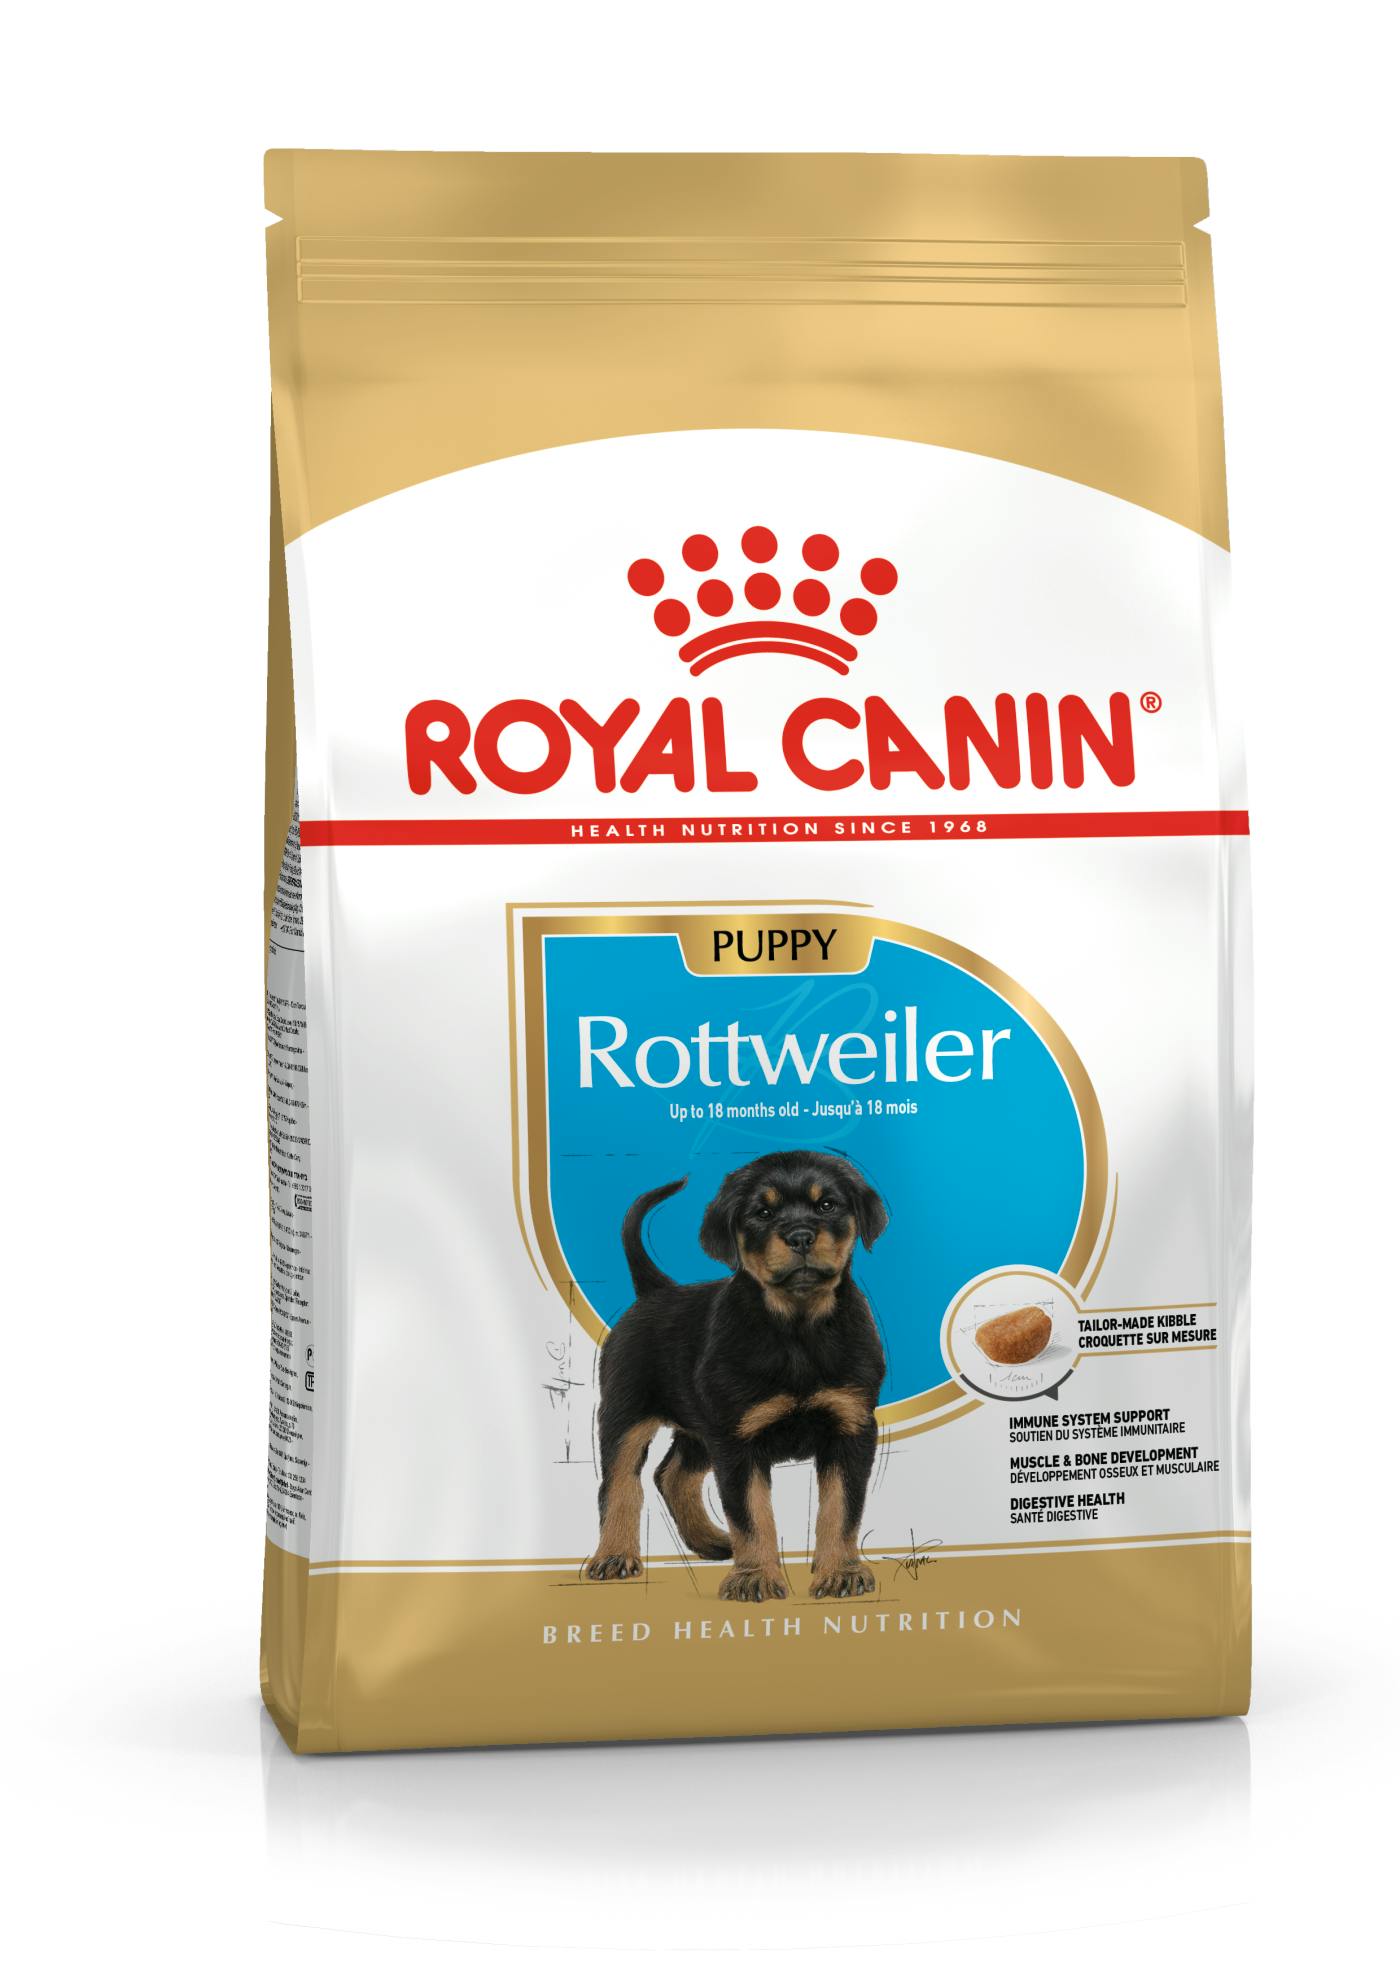 Rottweiler Puppy dry | Royal Canin